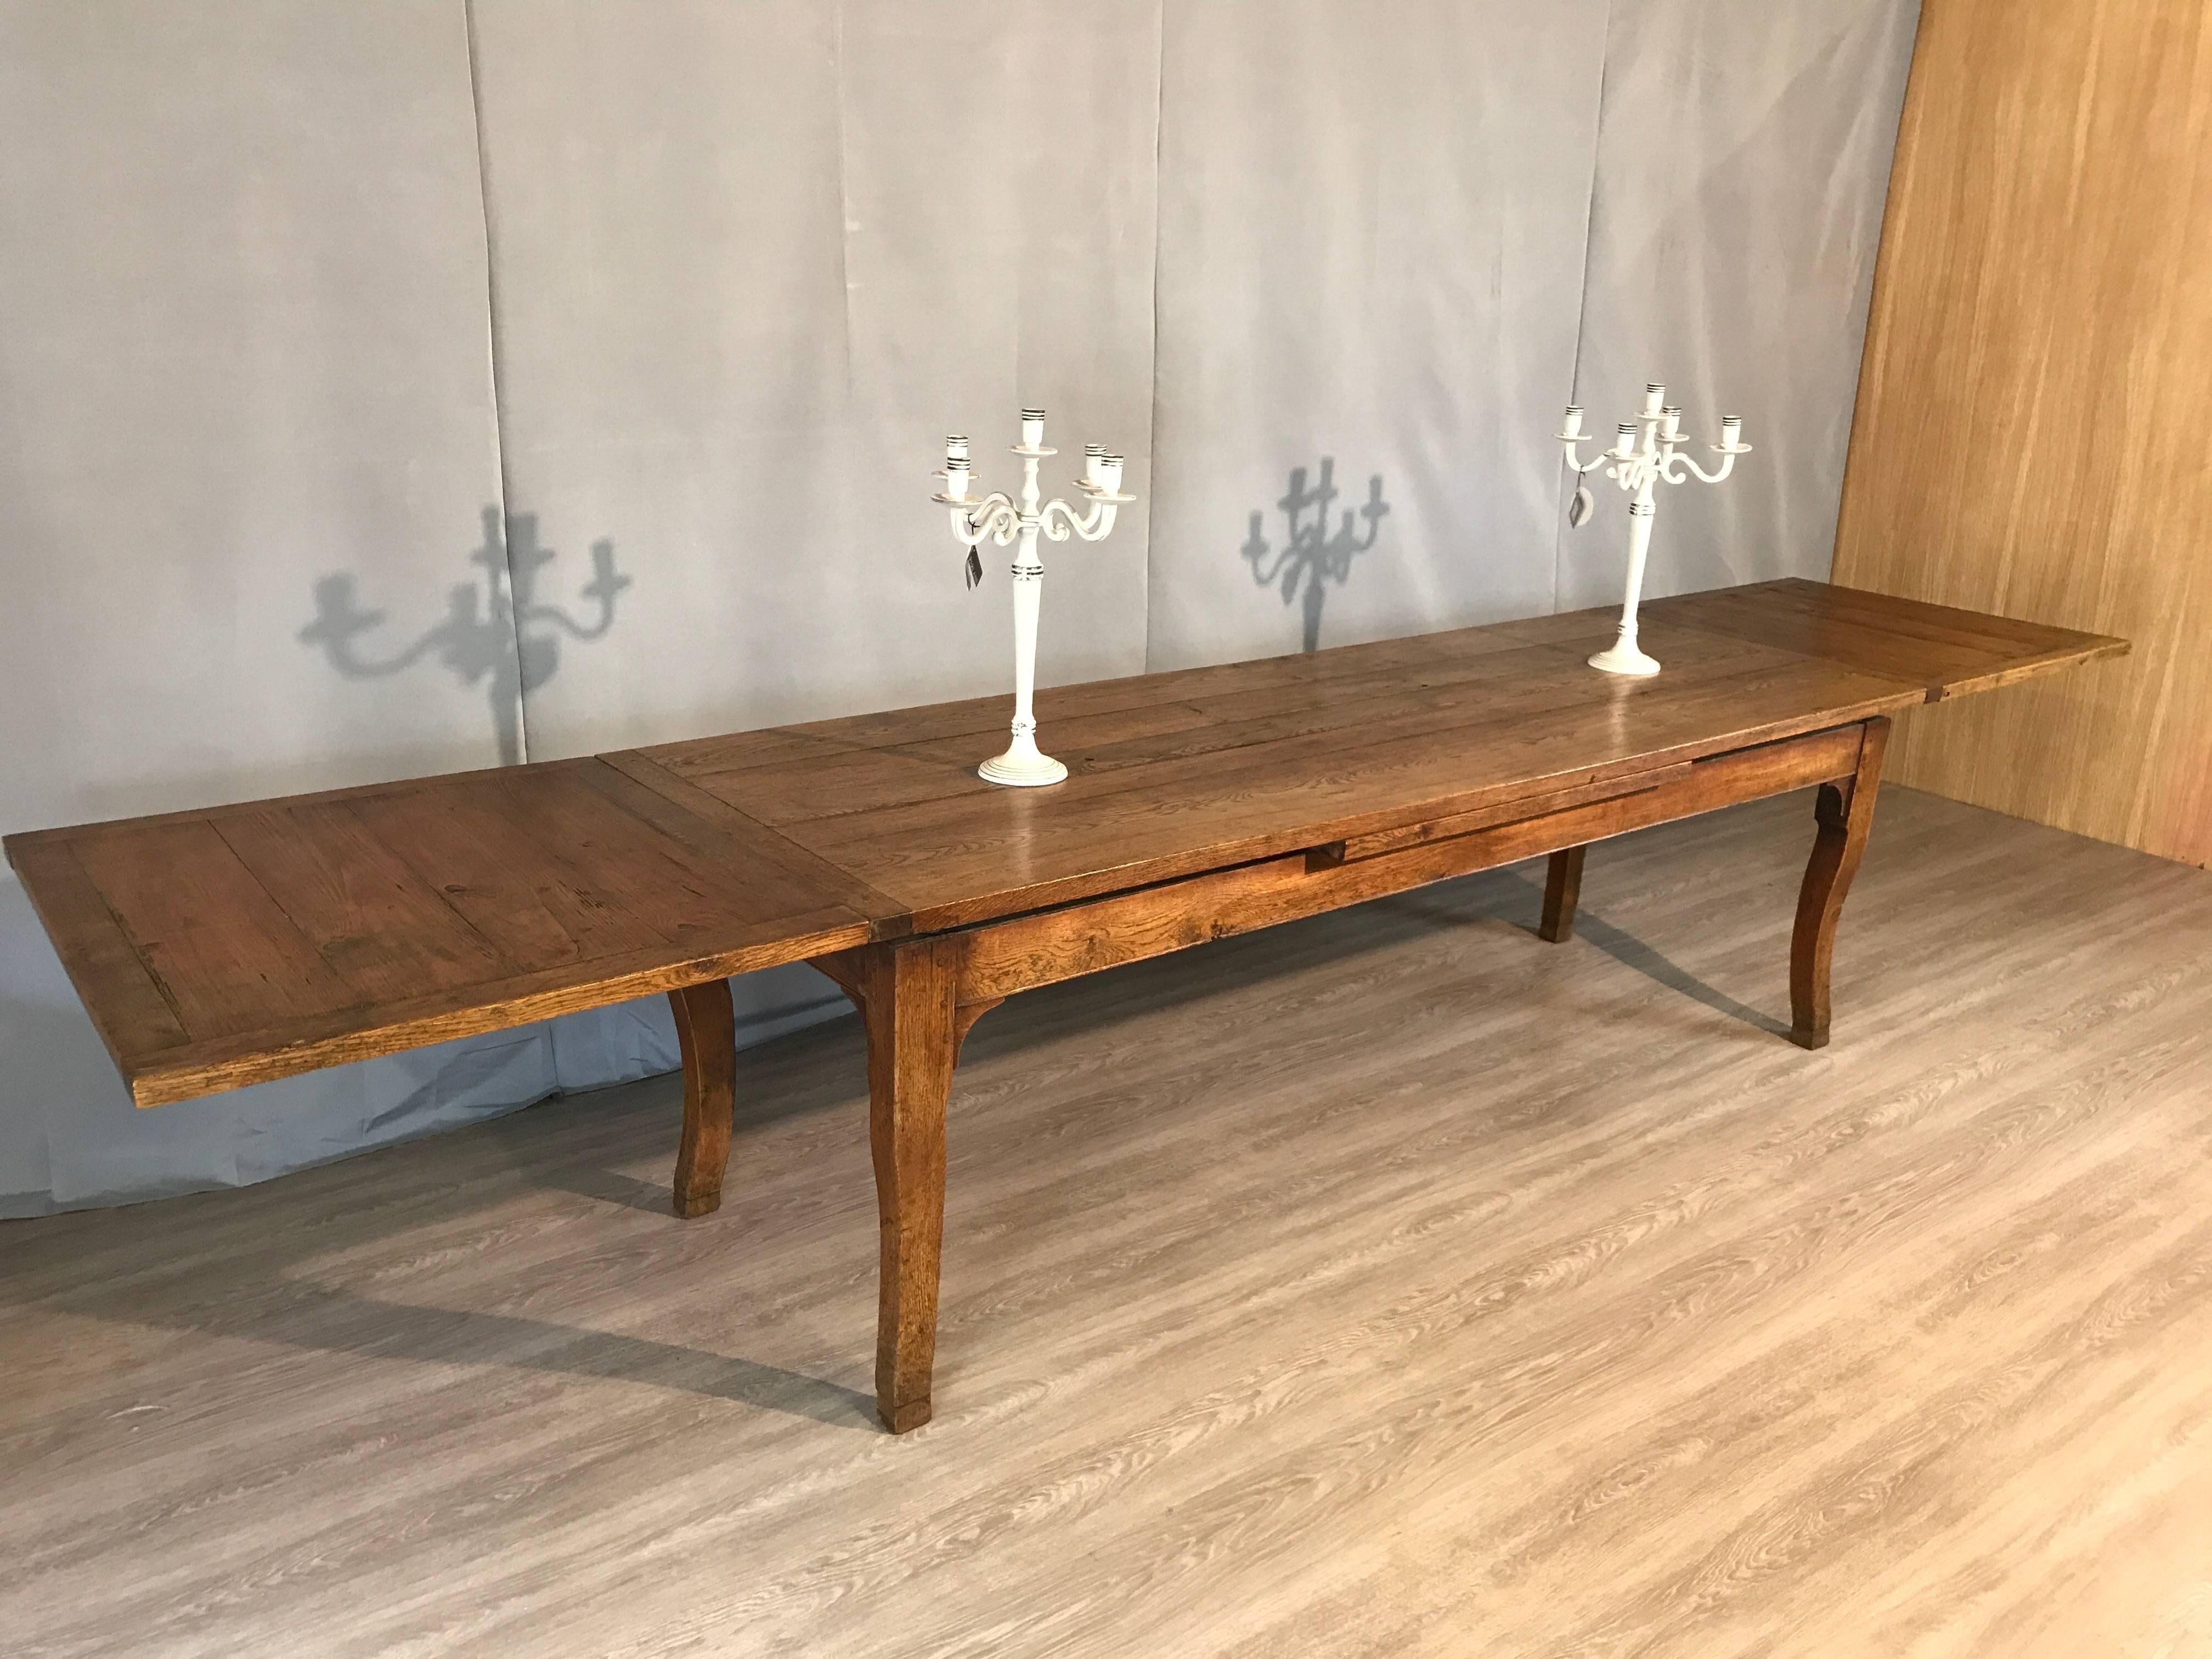 Substantial late 19th century oak French farmhouse double draw-leaf table. The table sits on a sturdy base supported by chunky cabriole legs raised on a later hoofed foot, which allows a good 24